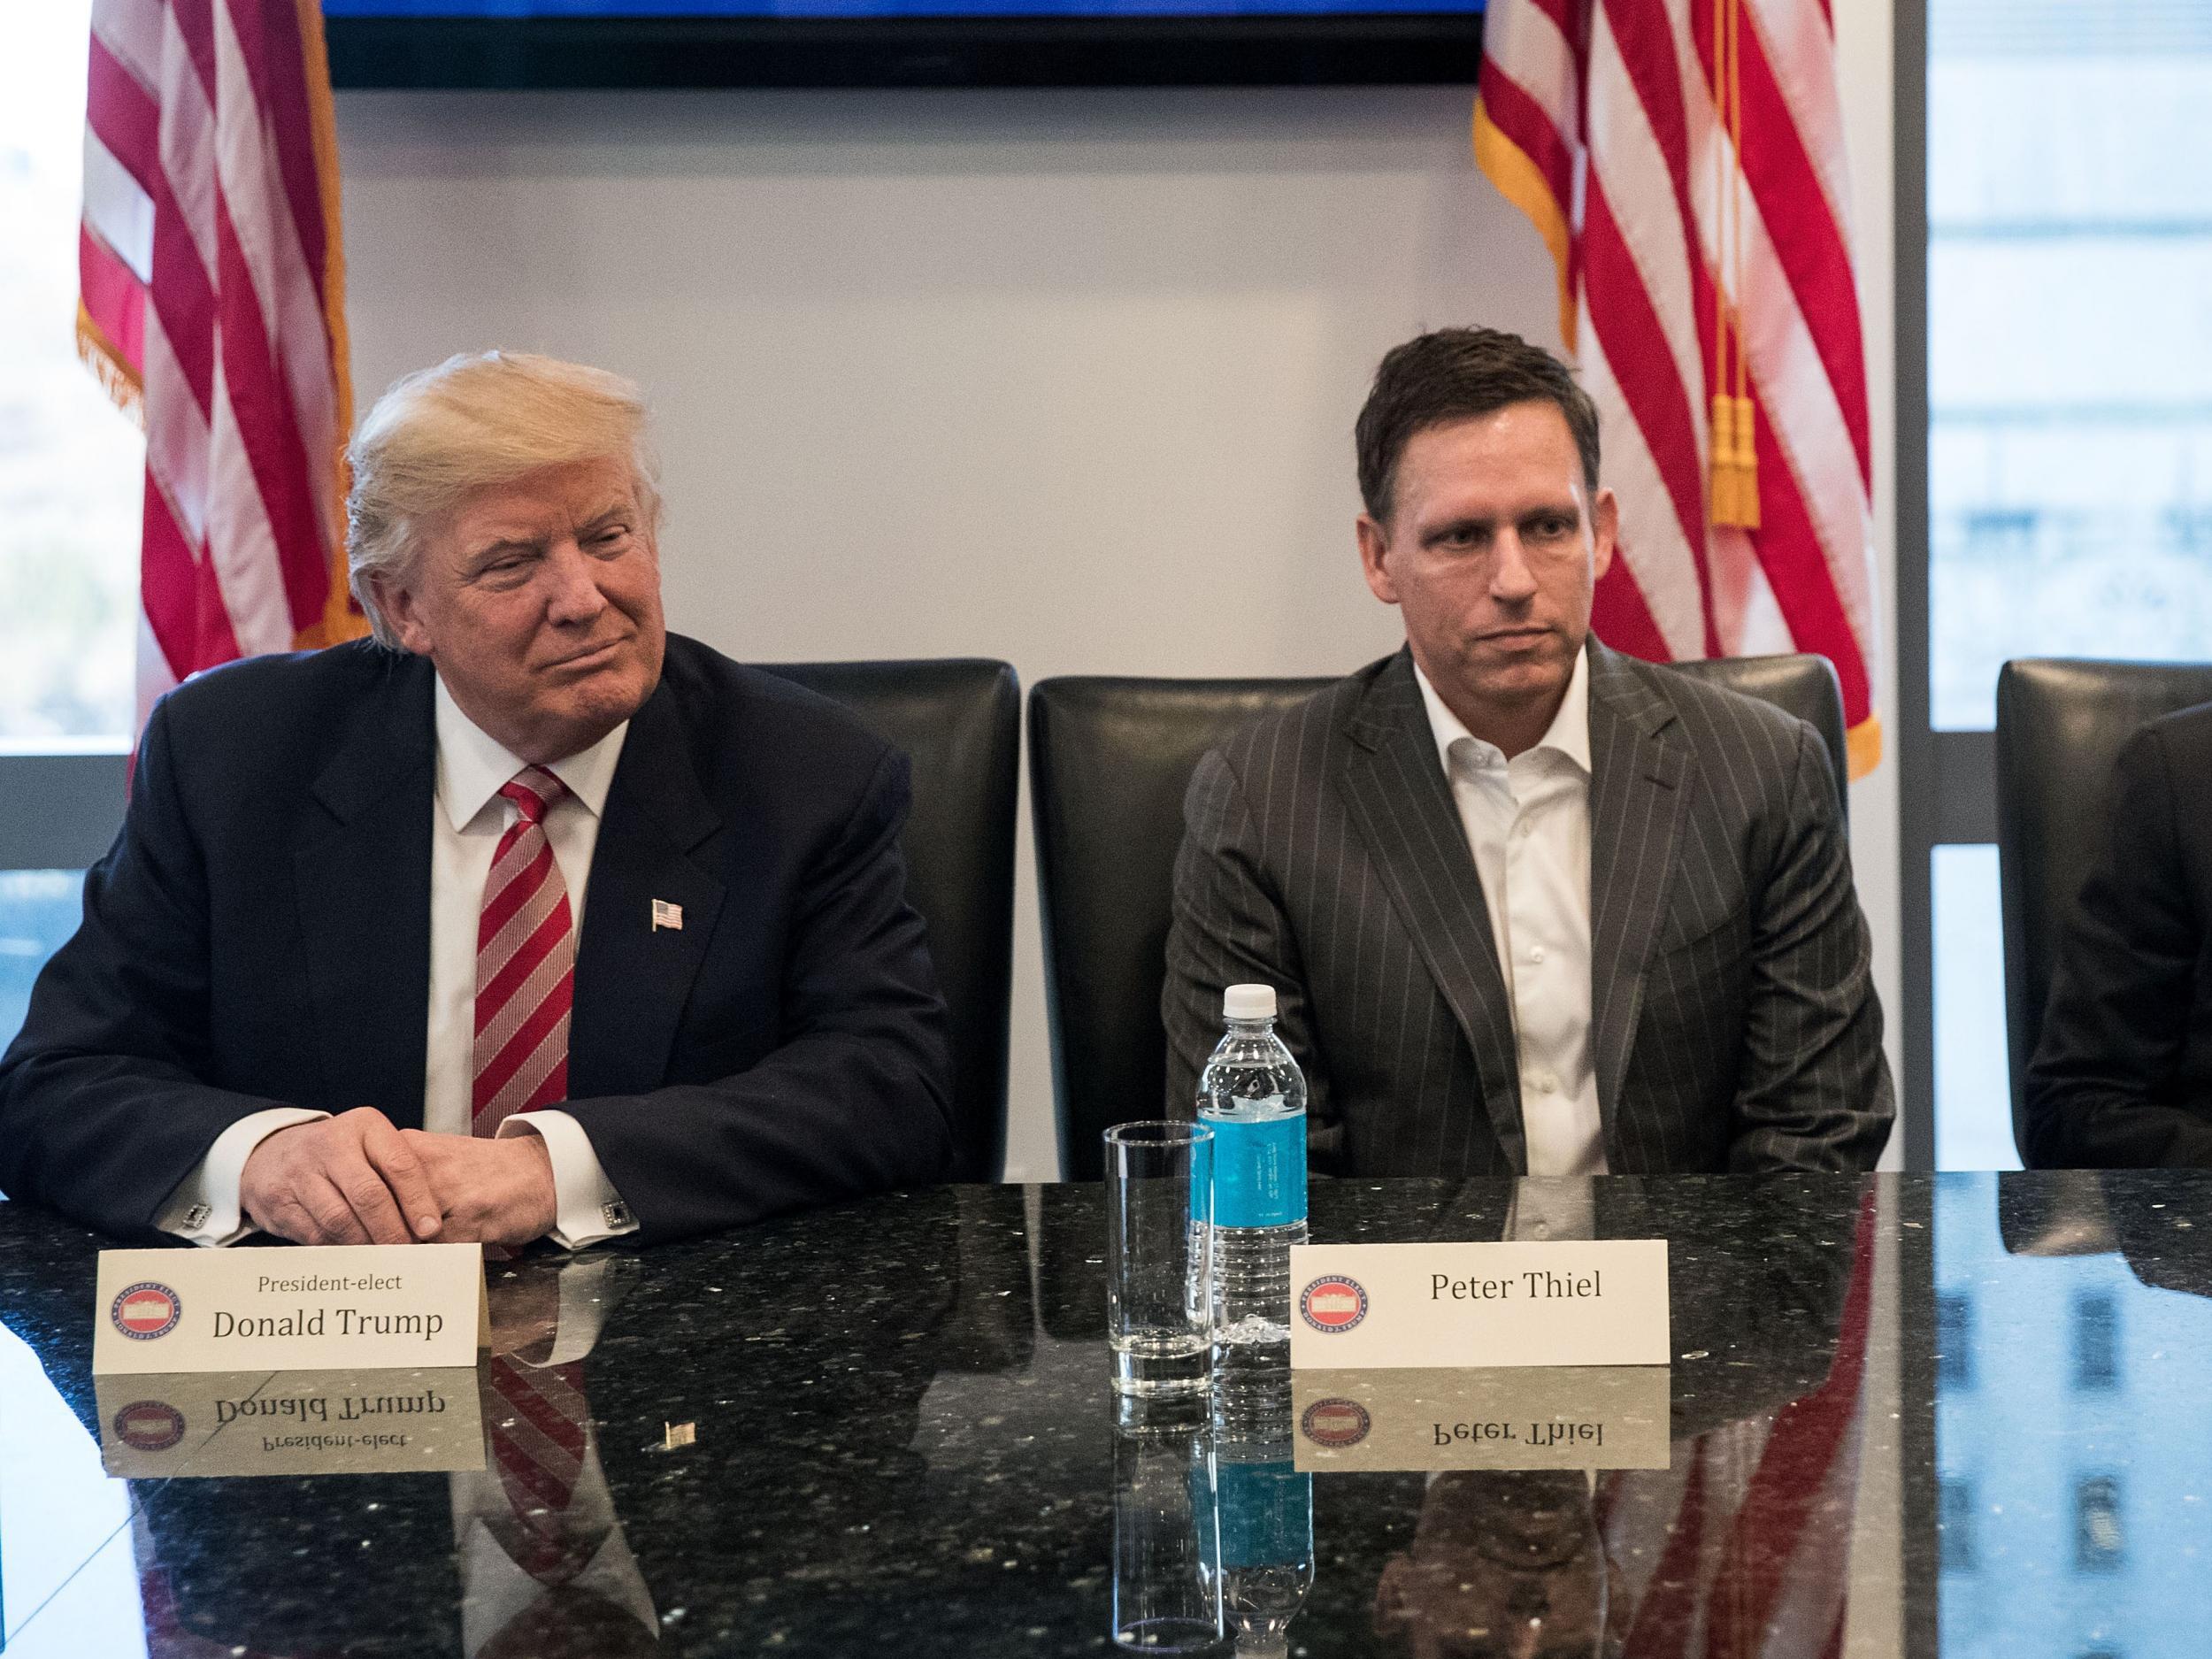 Thiel (pictured with Donald Trump in 2016) is contemptuous of disconnected elites who he believes are turning people against capitalism